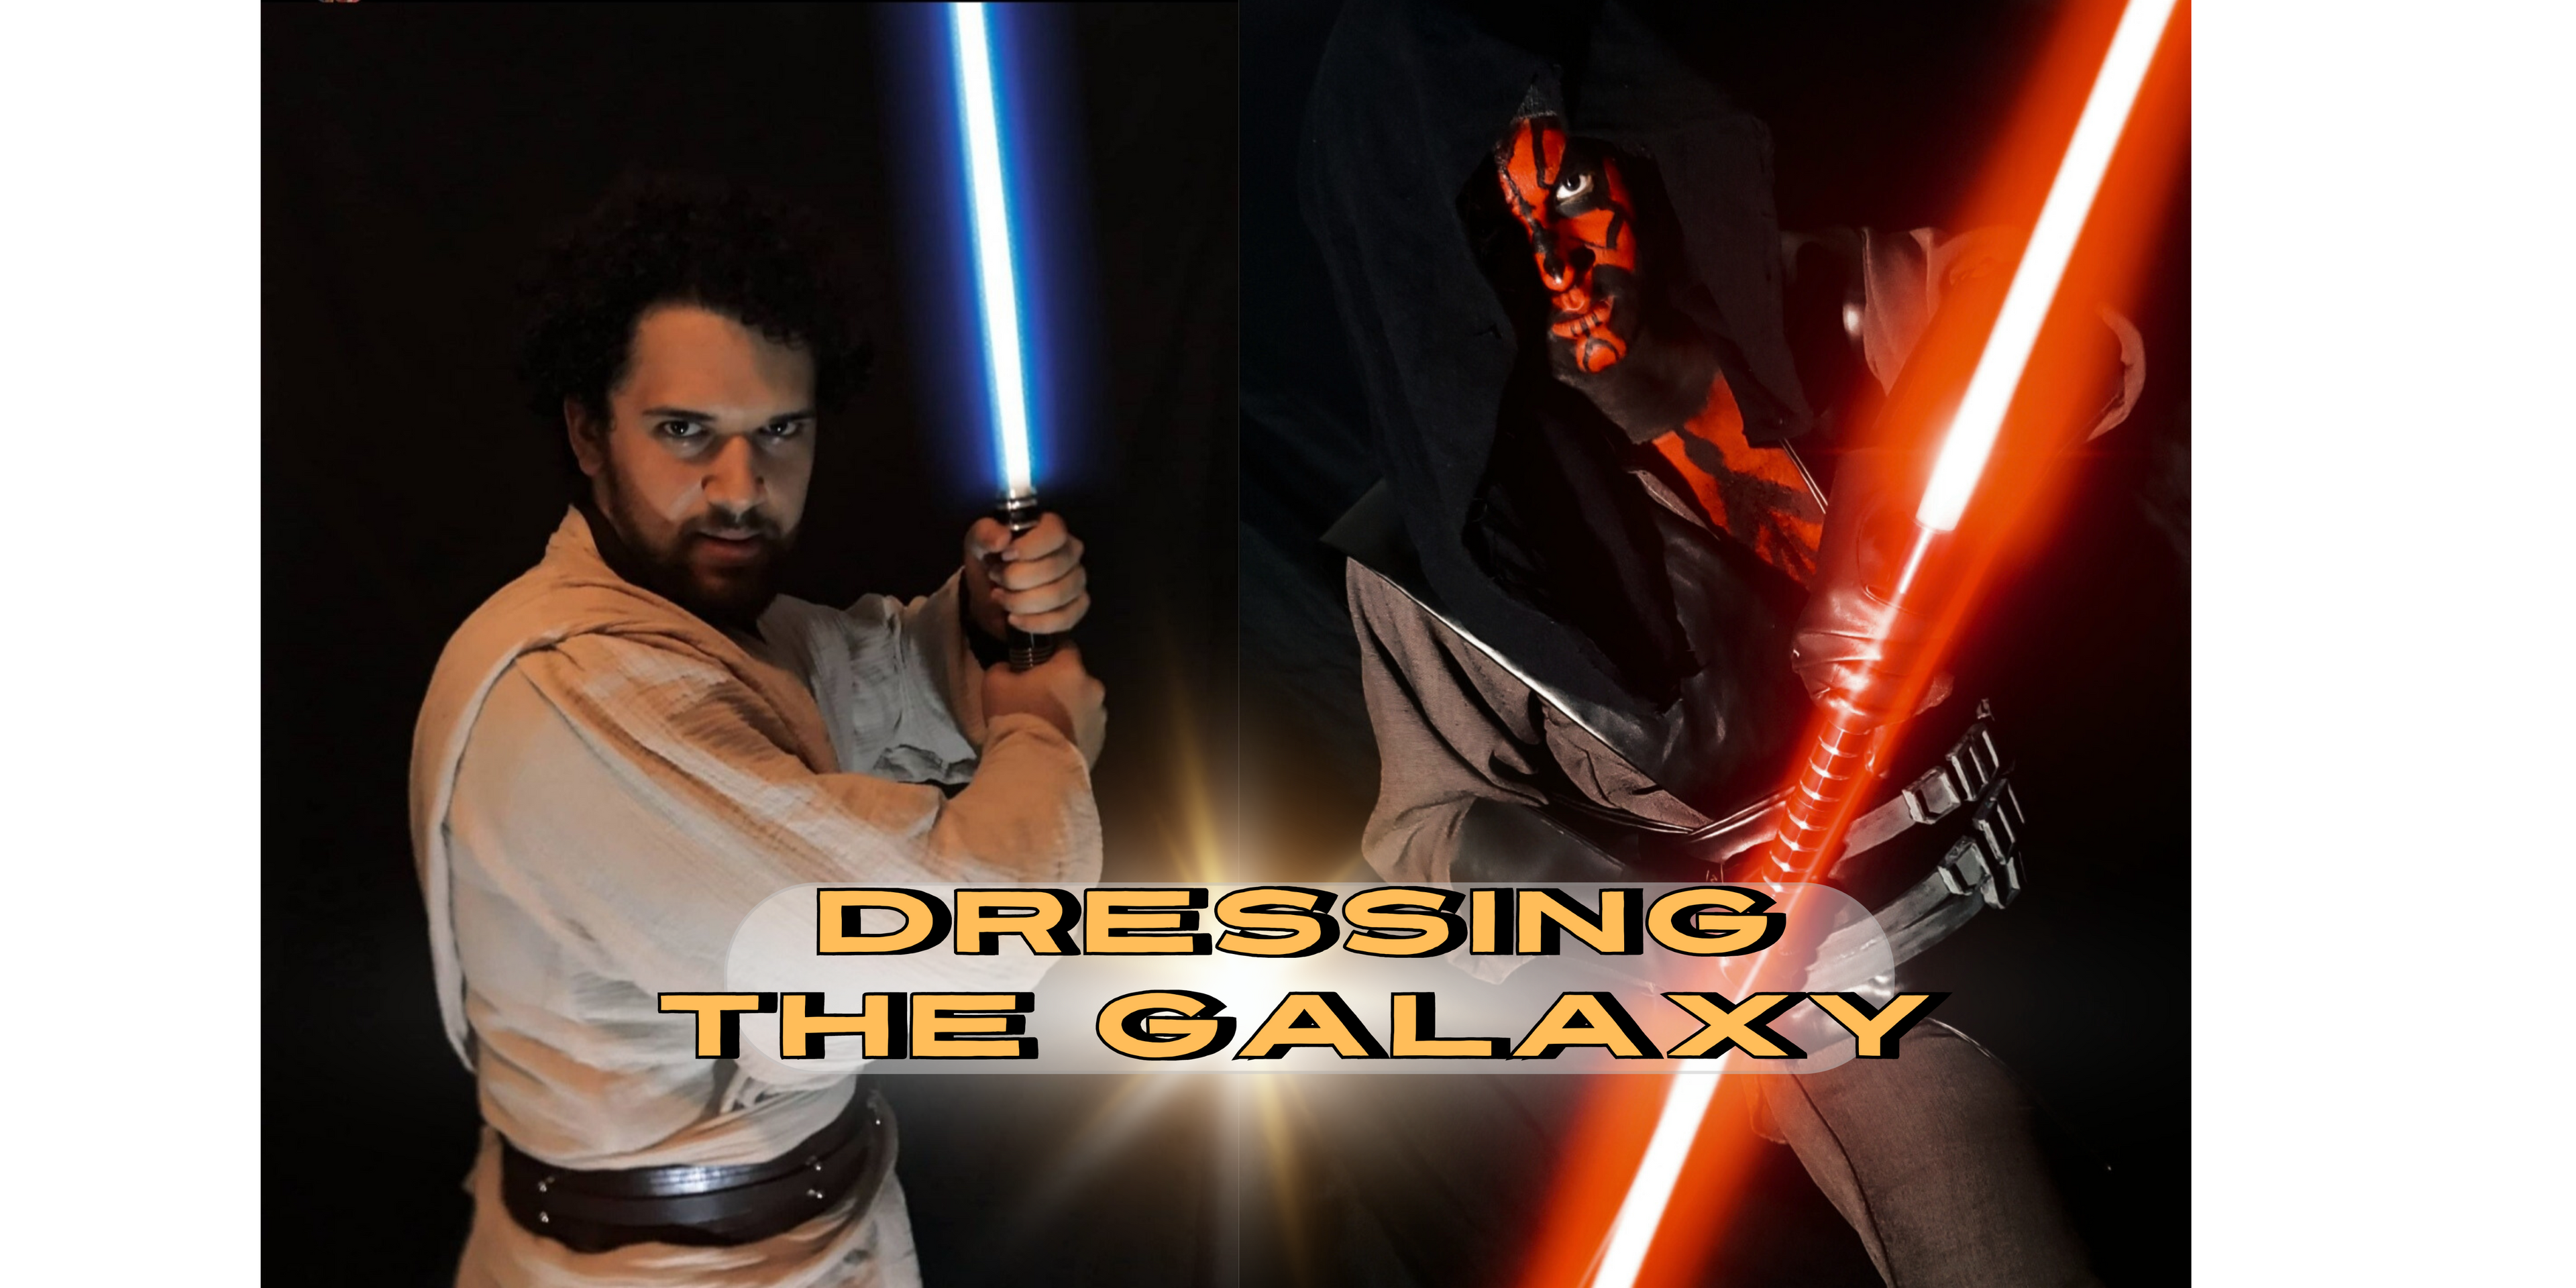 STAR WARS COSTUMES made by spare time cosplay feturing obi wan kenobi costumes and darth maul costumes